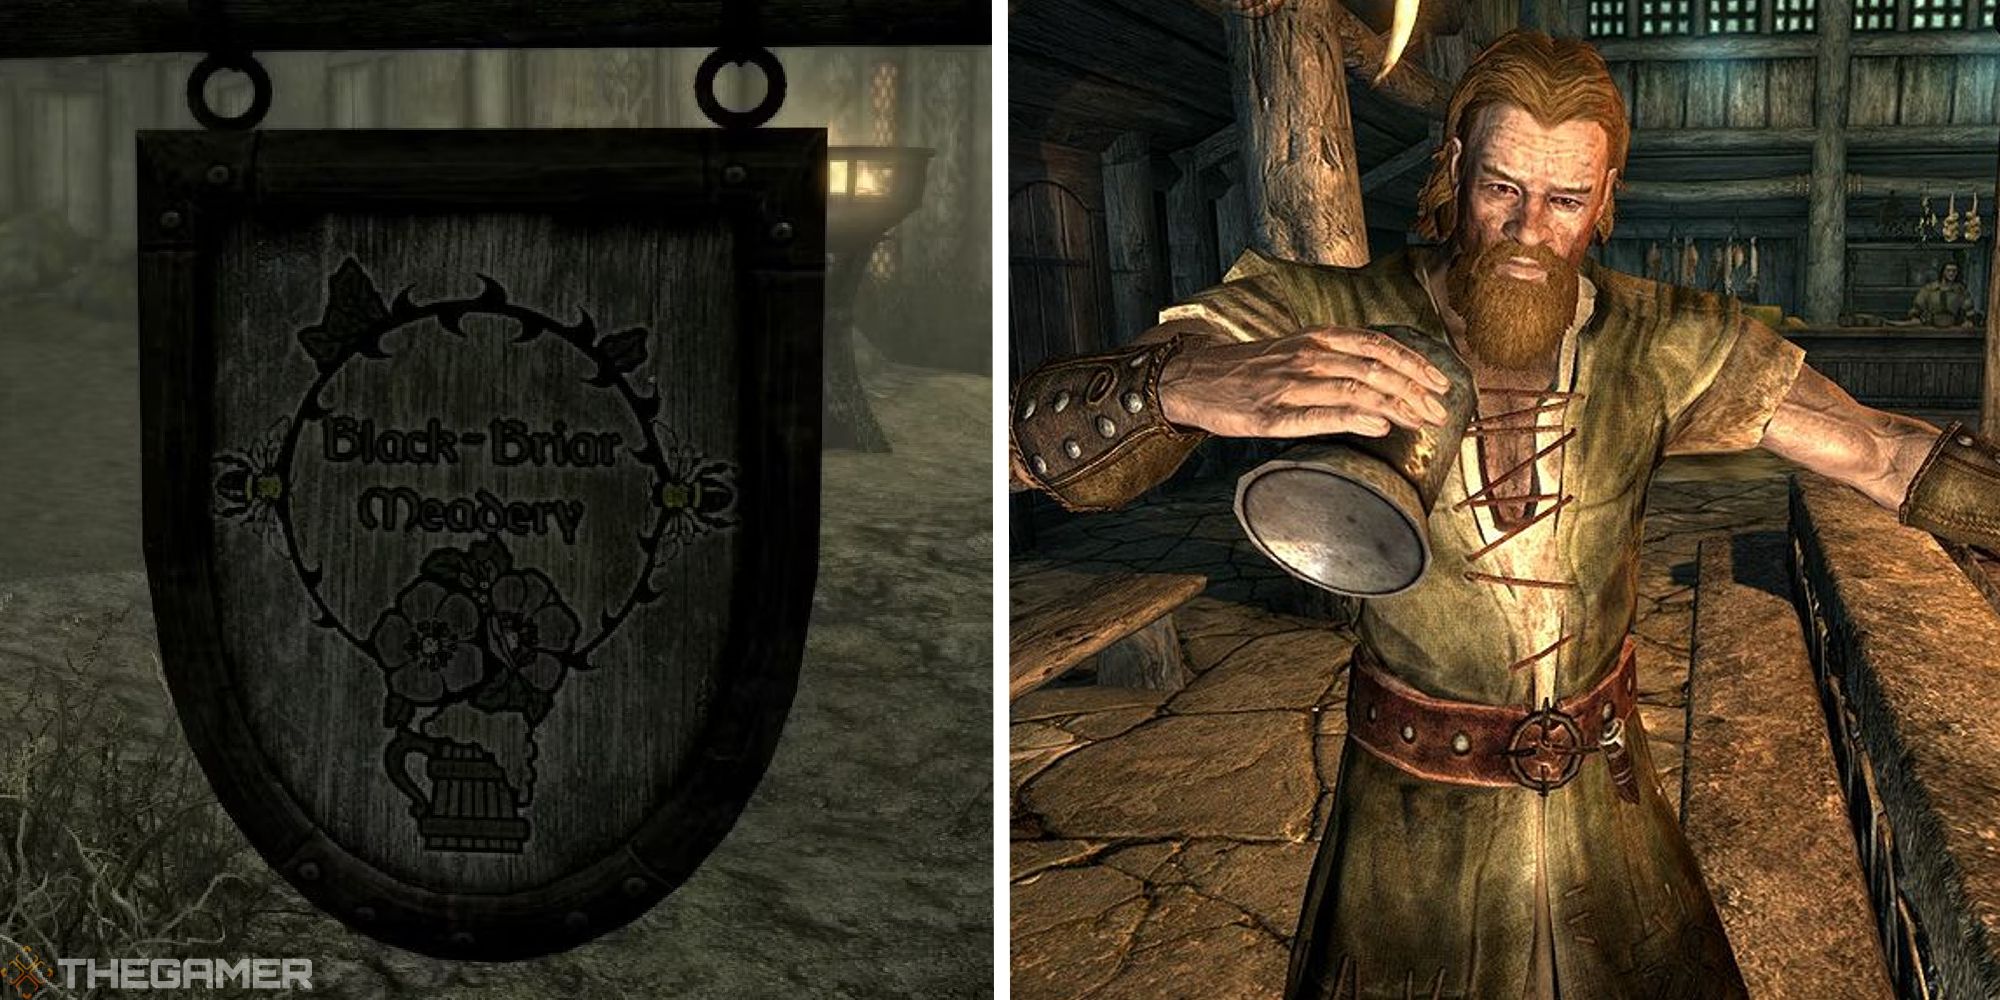 image of black briar meadery sign next to image of NPC taking a drink